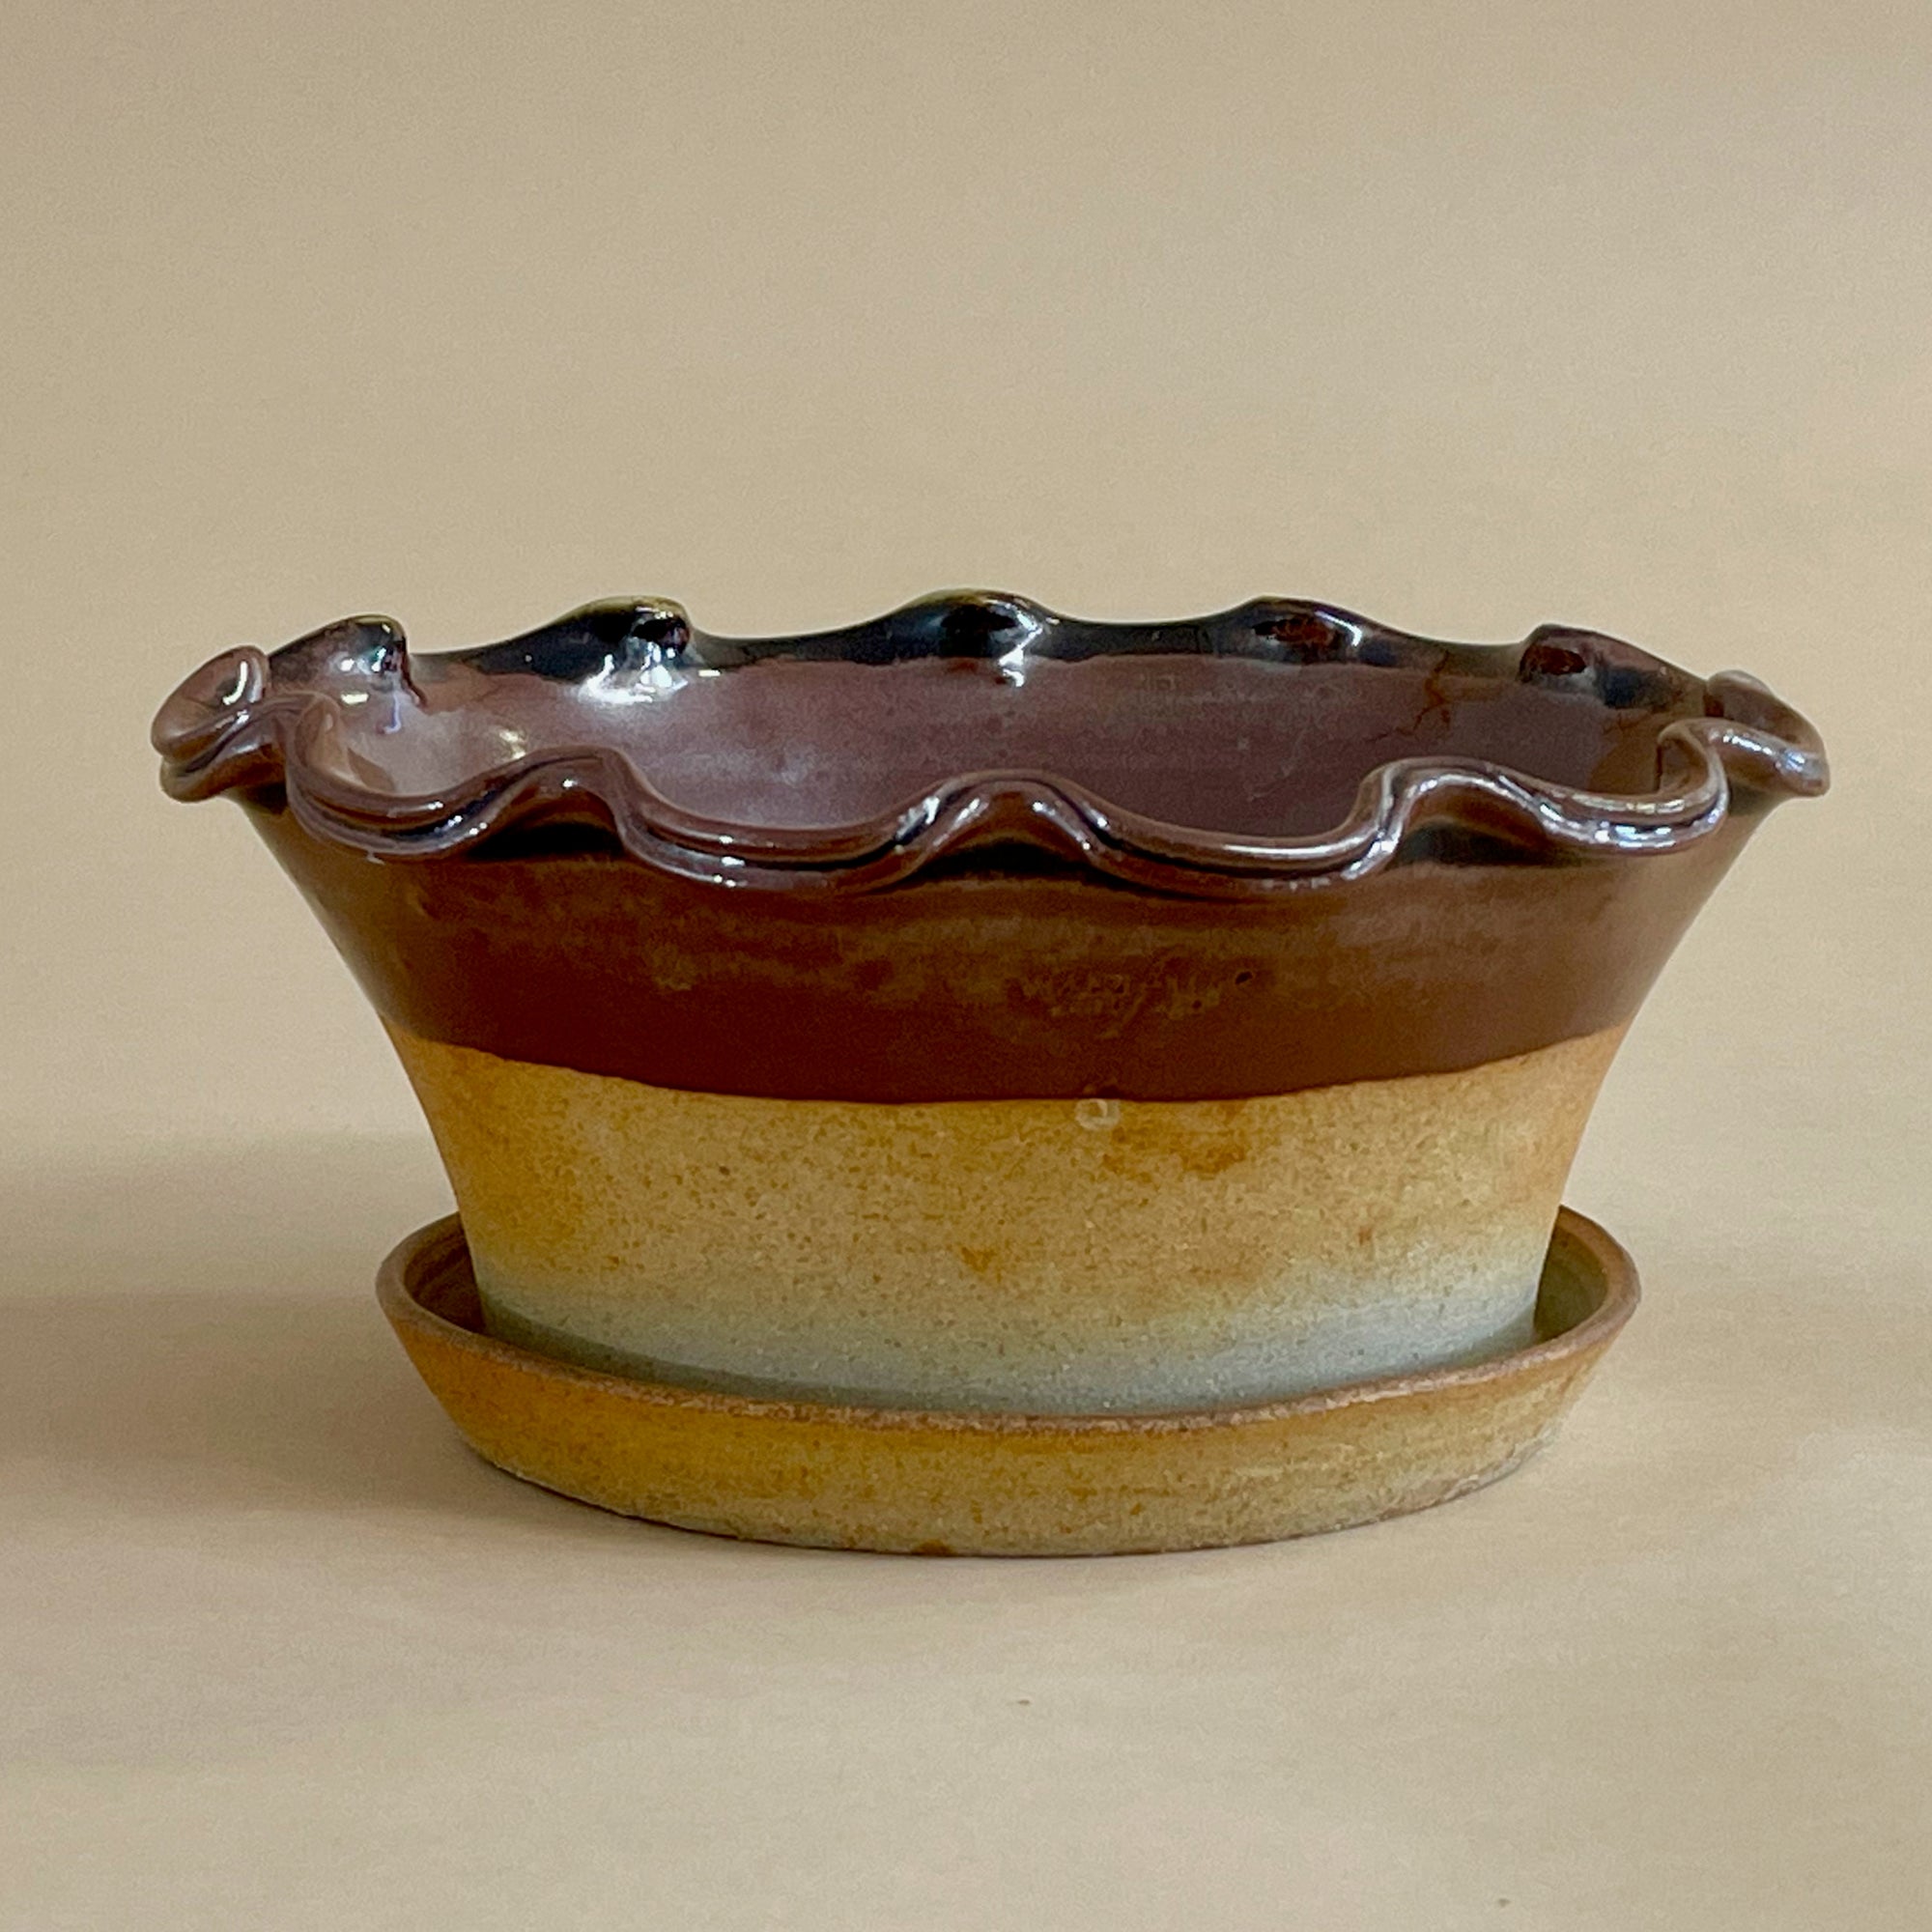 English Split Rim Scallop with Attached Saucer